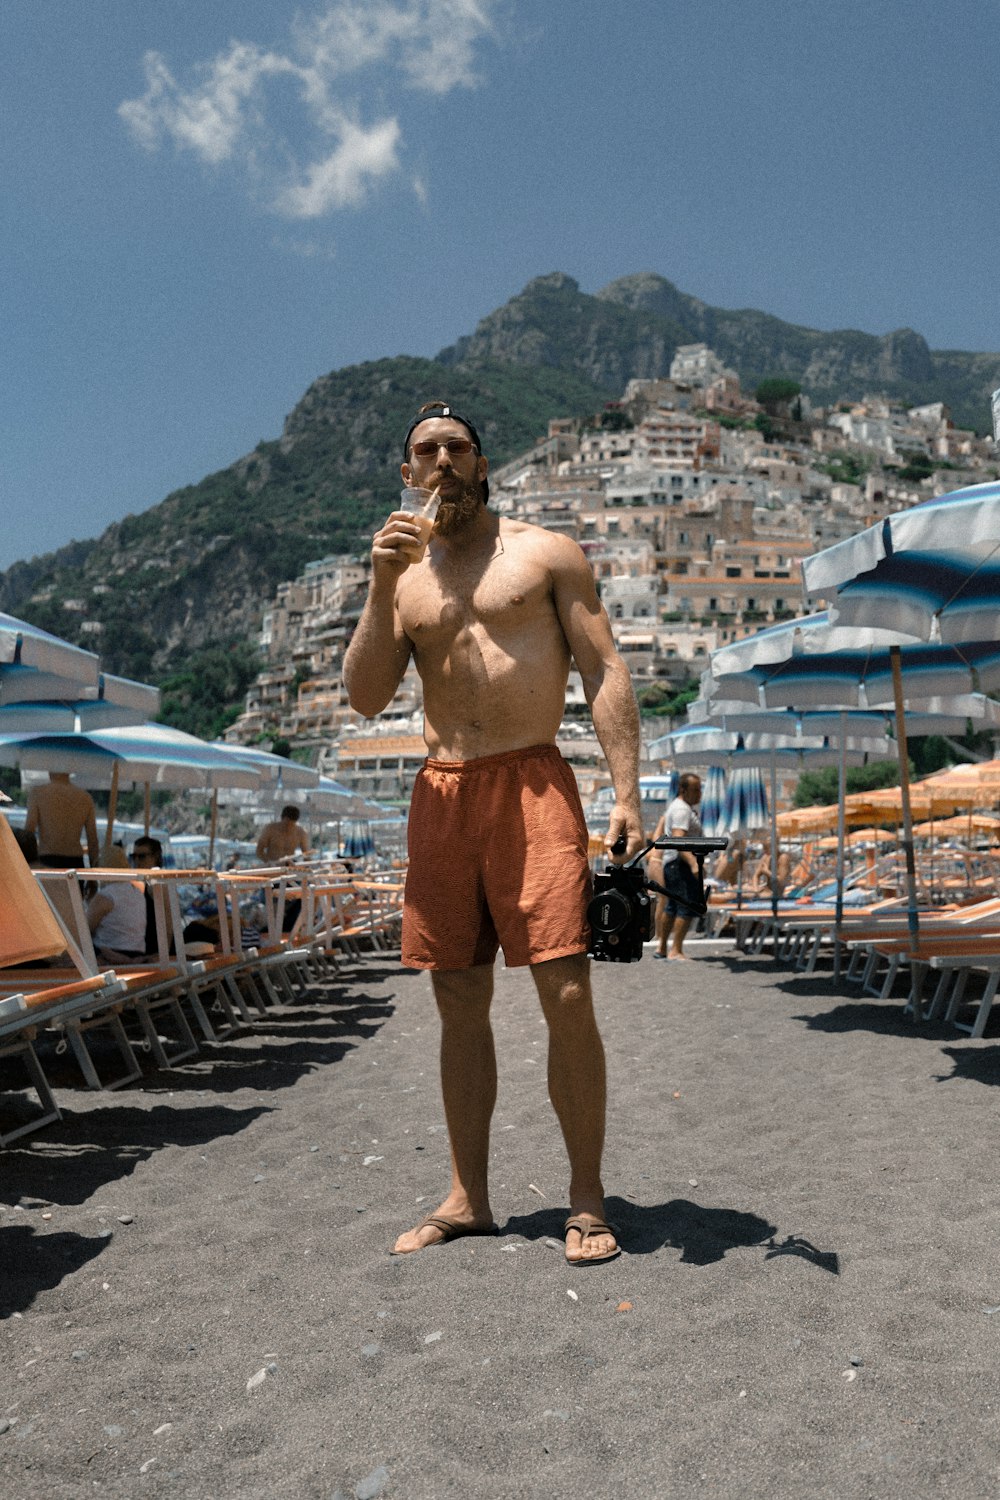 man wearing orange shorts standing on beach sand while drinking on cup